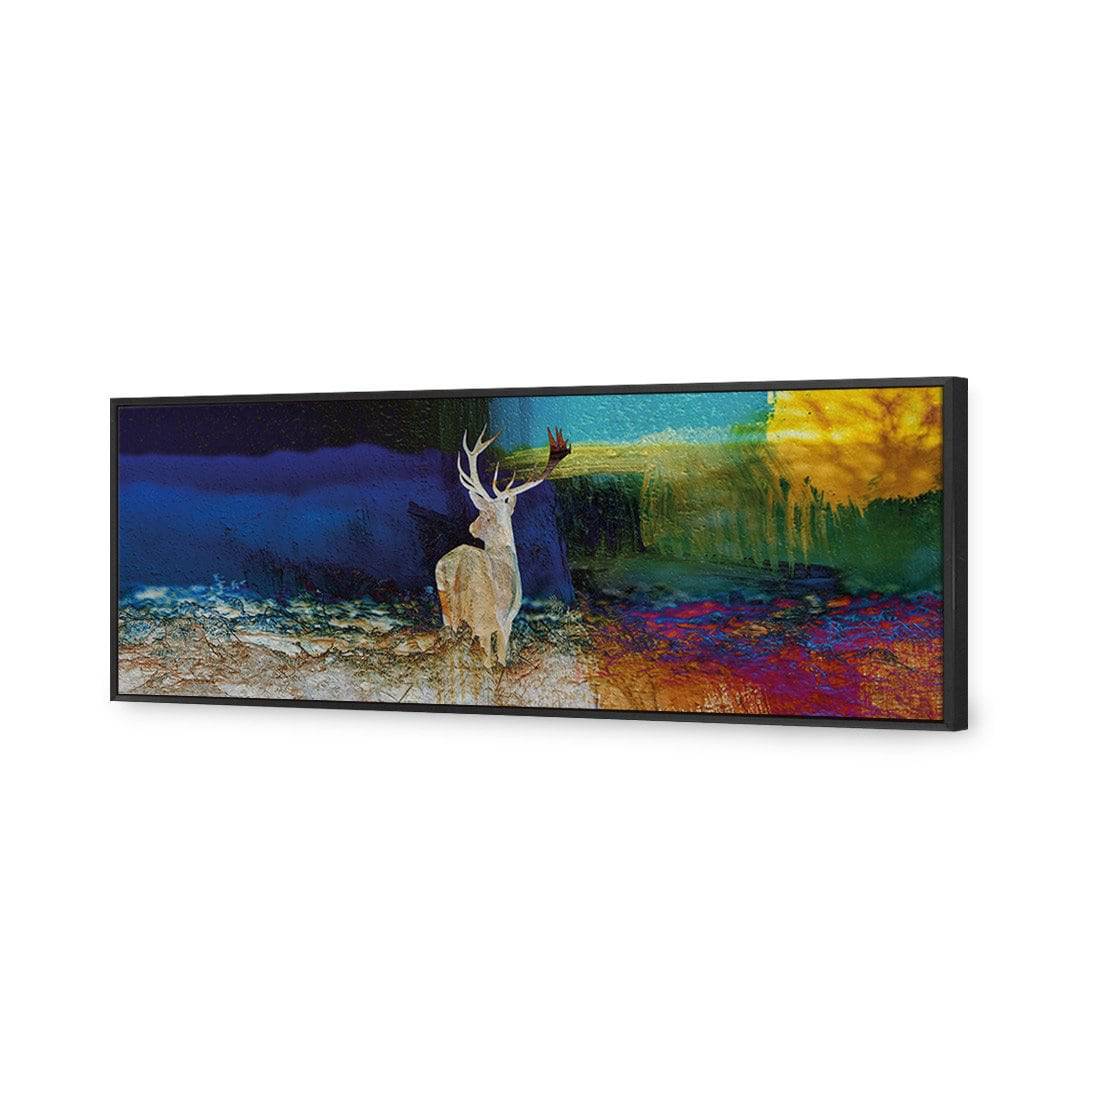 Stag In Confusion Canvas Art-Canvas-Wall Art Designs-60x20cm-Canvas - Black Frame-Wall Art Designs